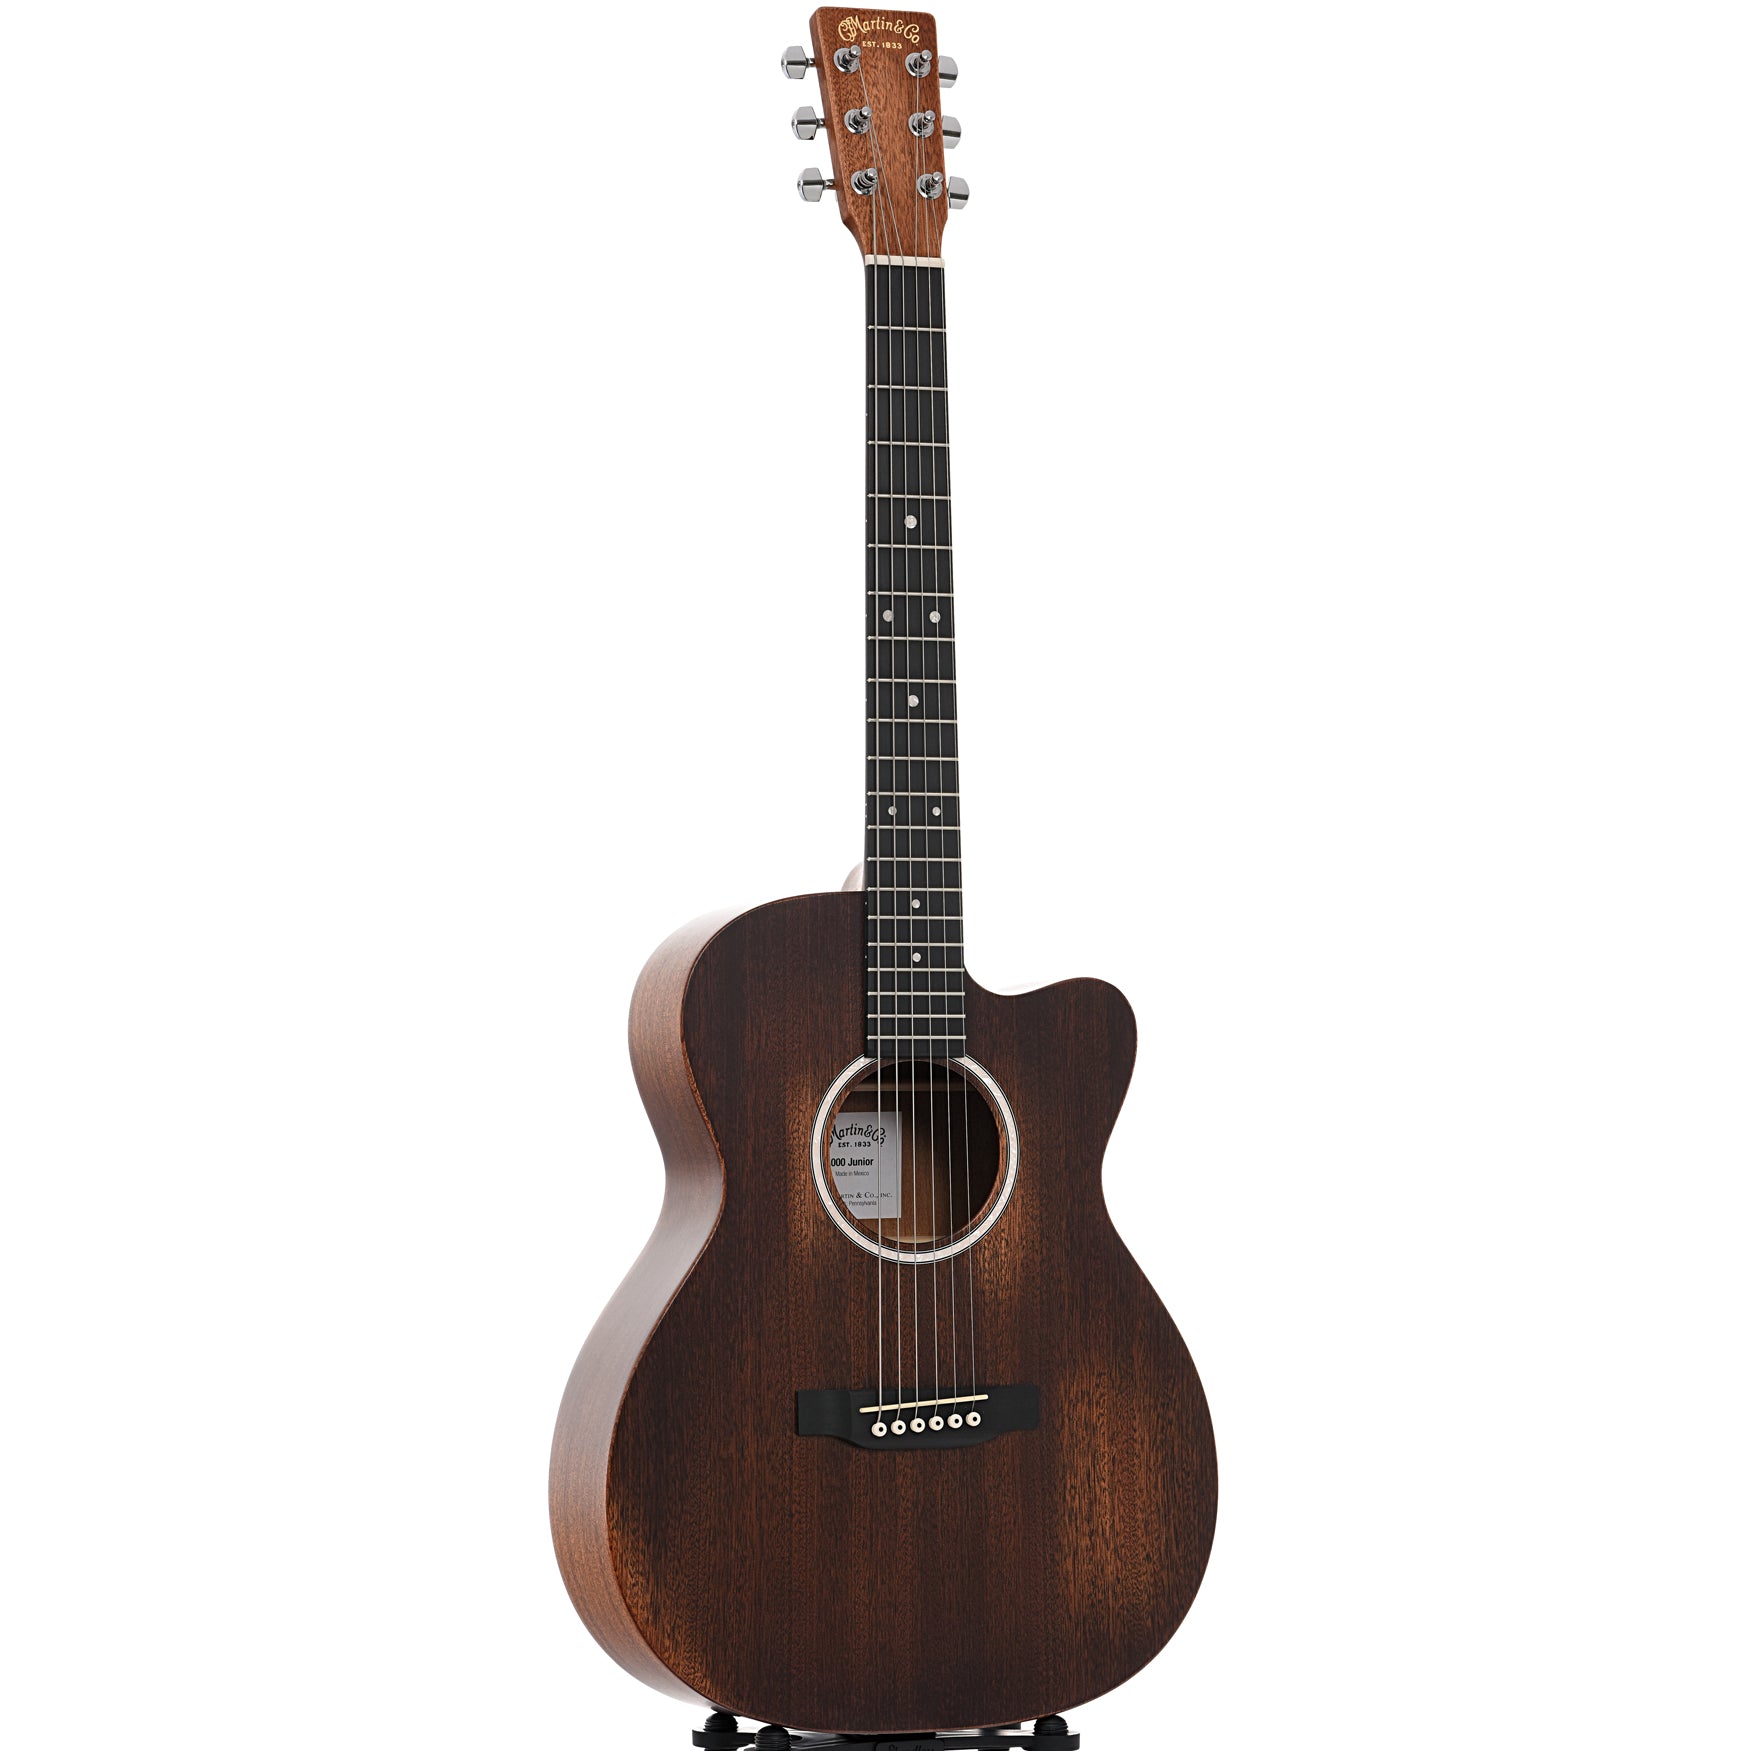 Full front and side of Martin 000CJR-10E StreetMaster